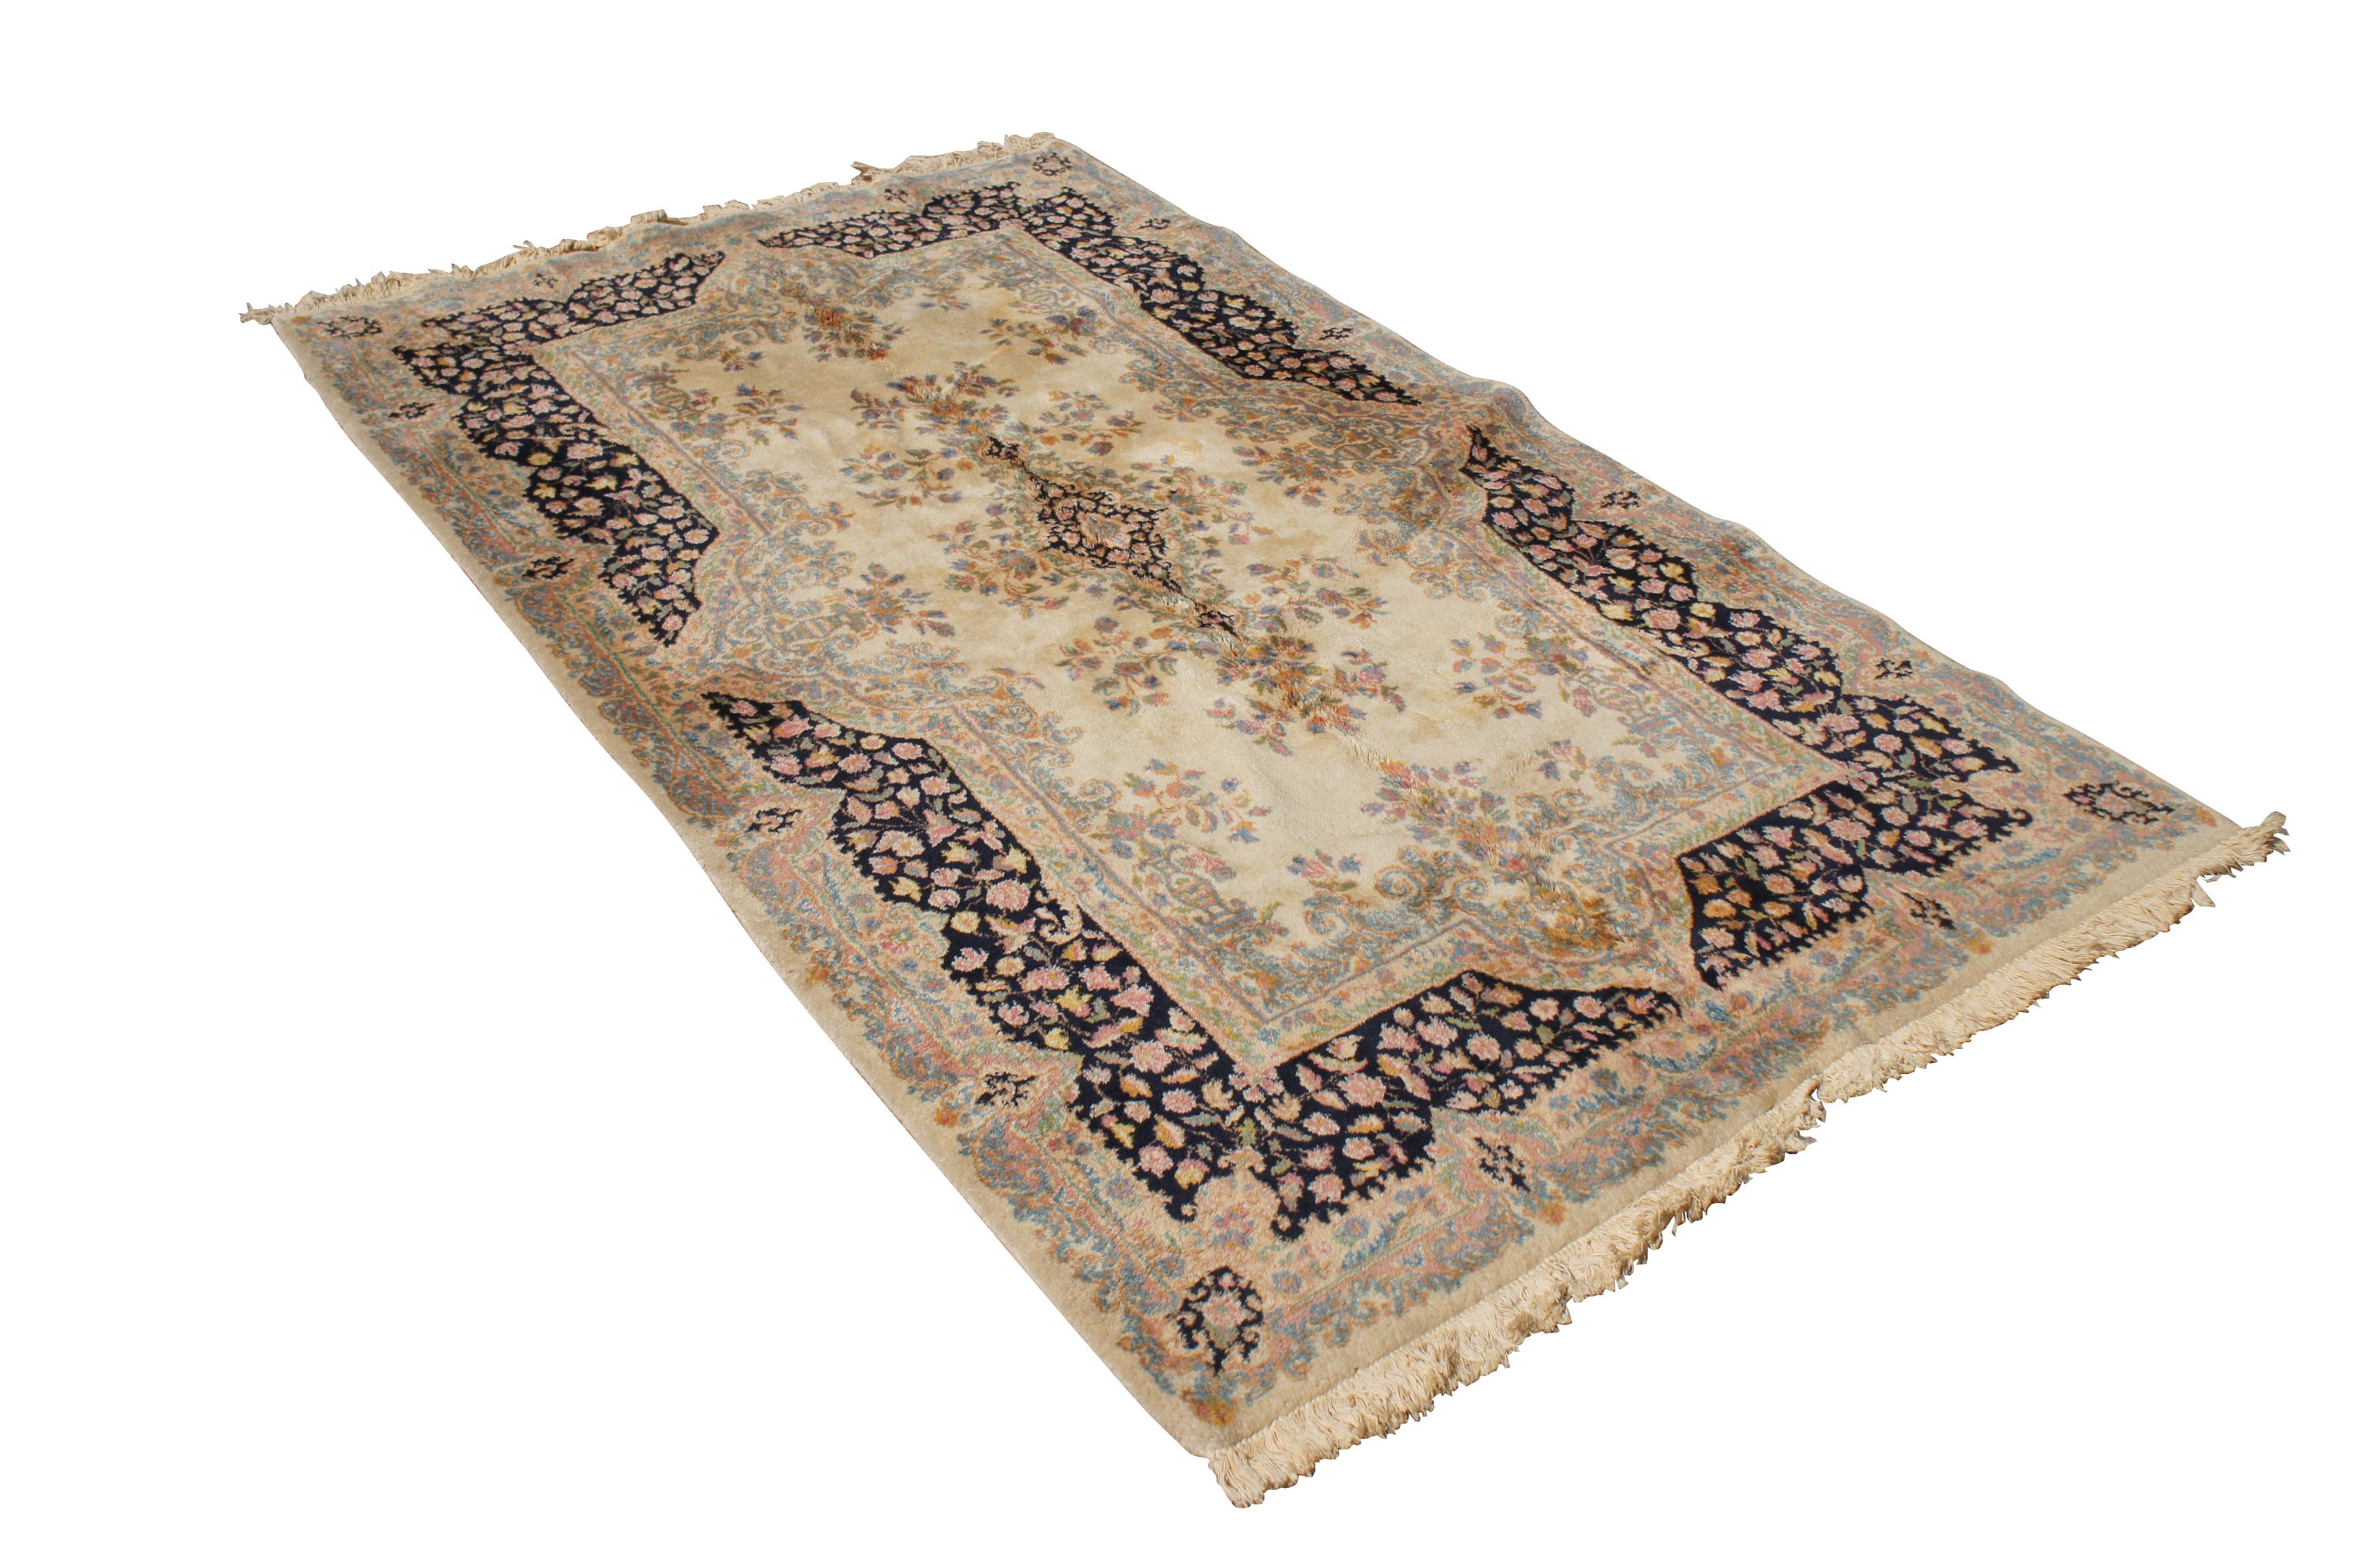 Vintage French Aubusson Hand Knotted Beige & Blue Wool Area Rug 5' x 8.5' In Good Condition For Sale In Dayton, OH